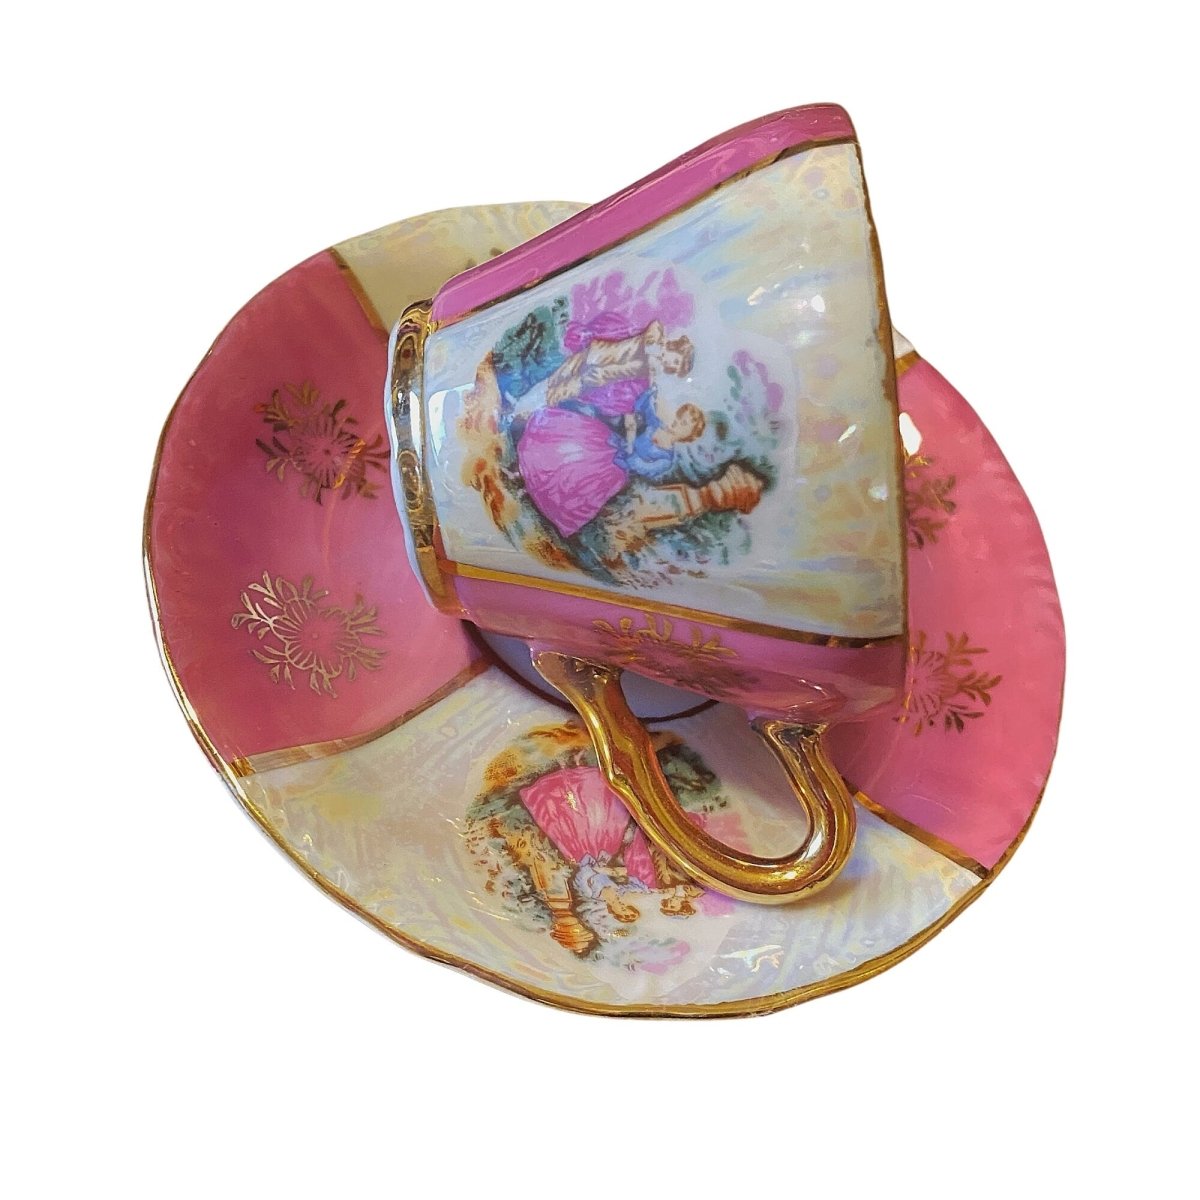 Lusterware | Pink & Pearl Polka miniature | Fragonard Lovers, golden filigree flowers and finishing touches - Chinamania.shop